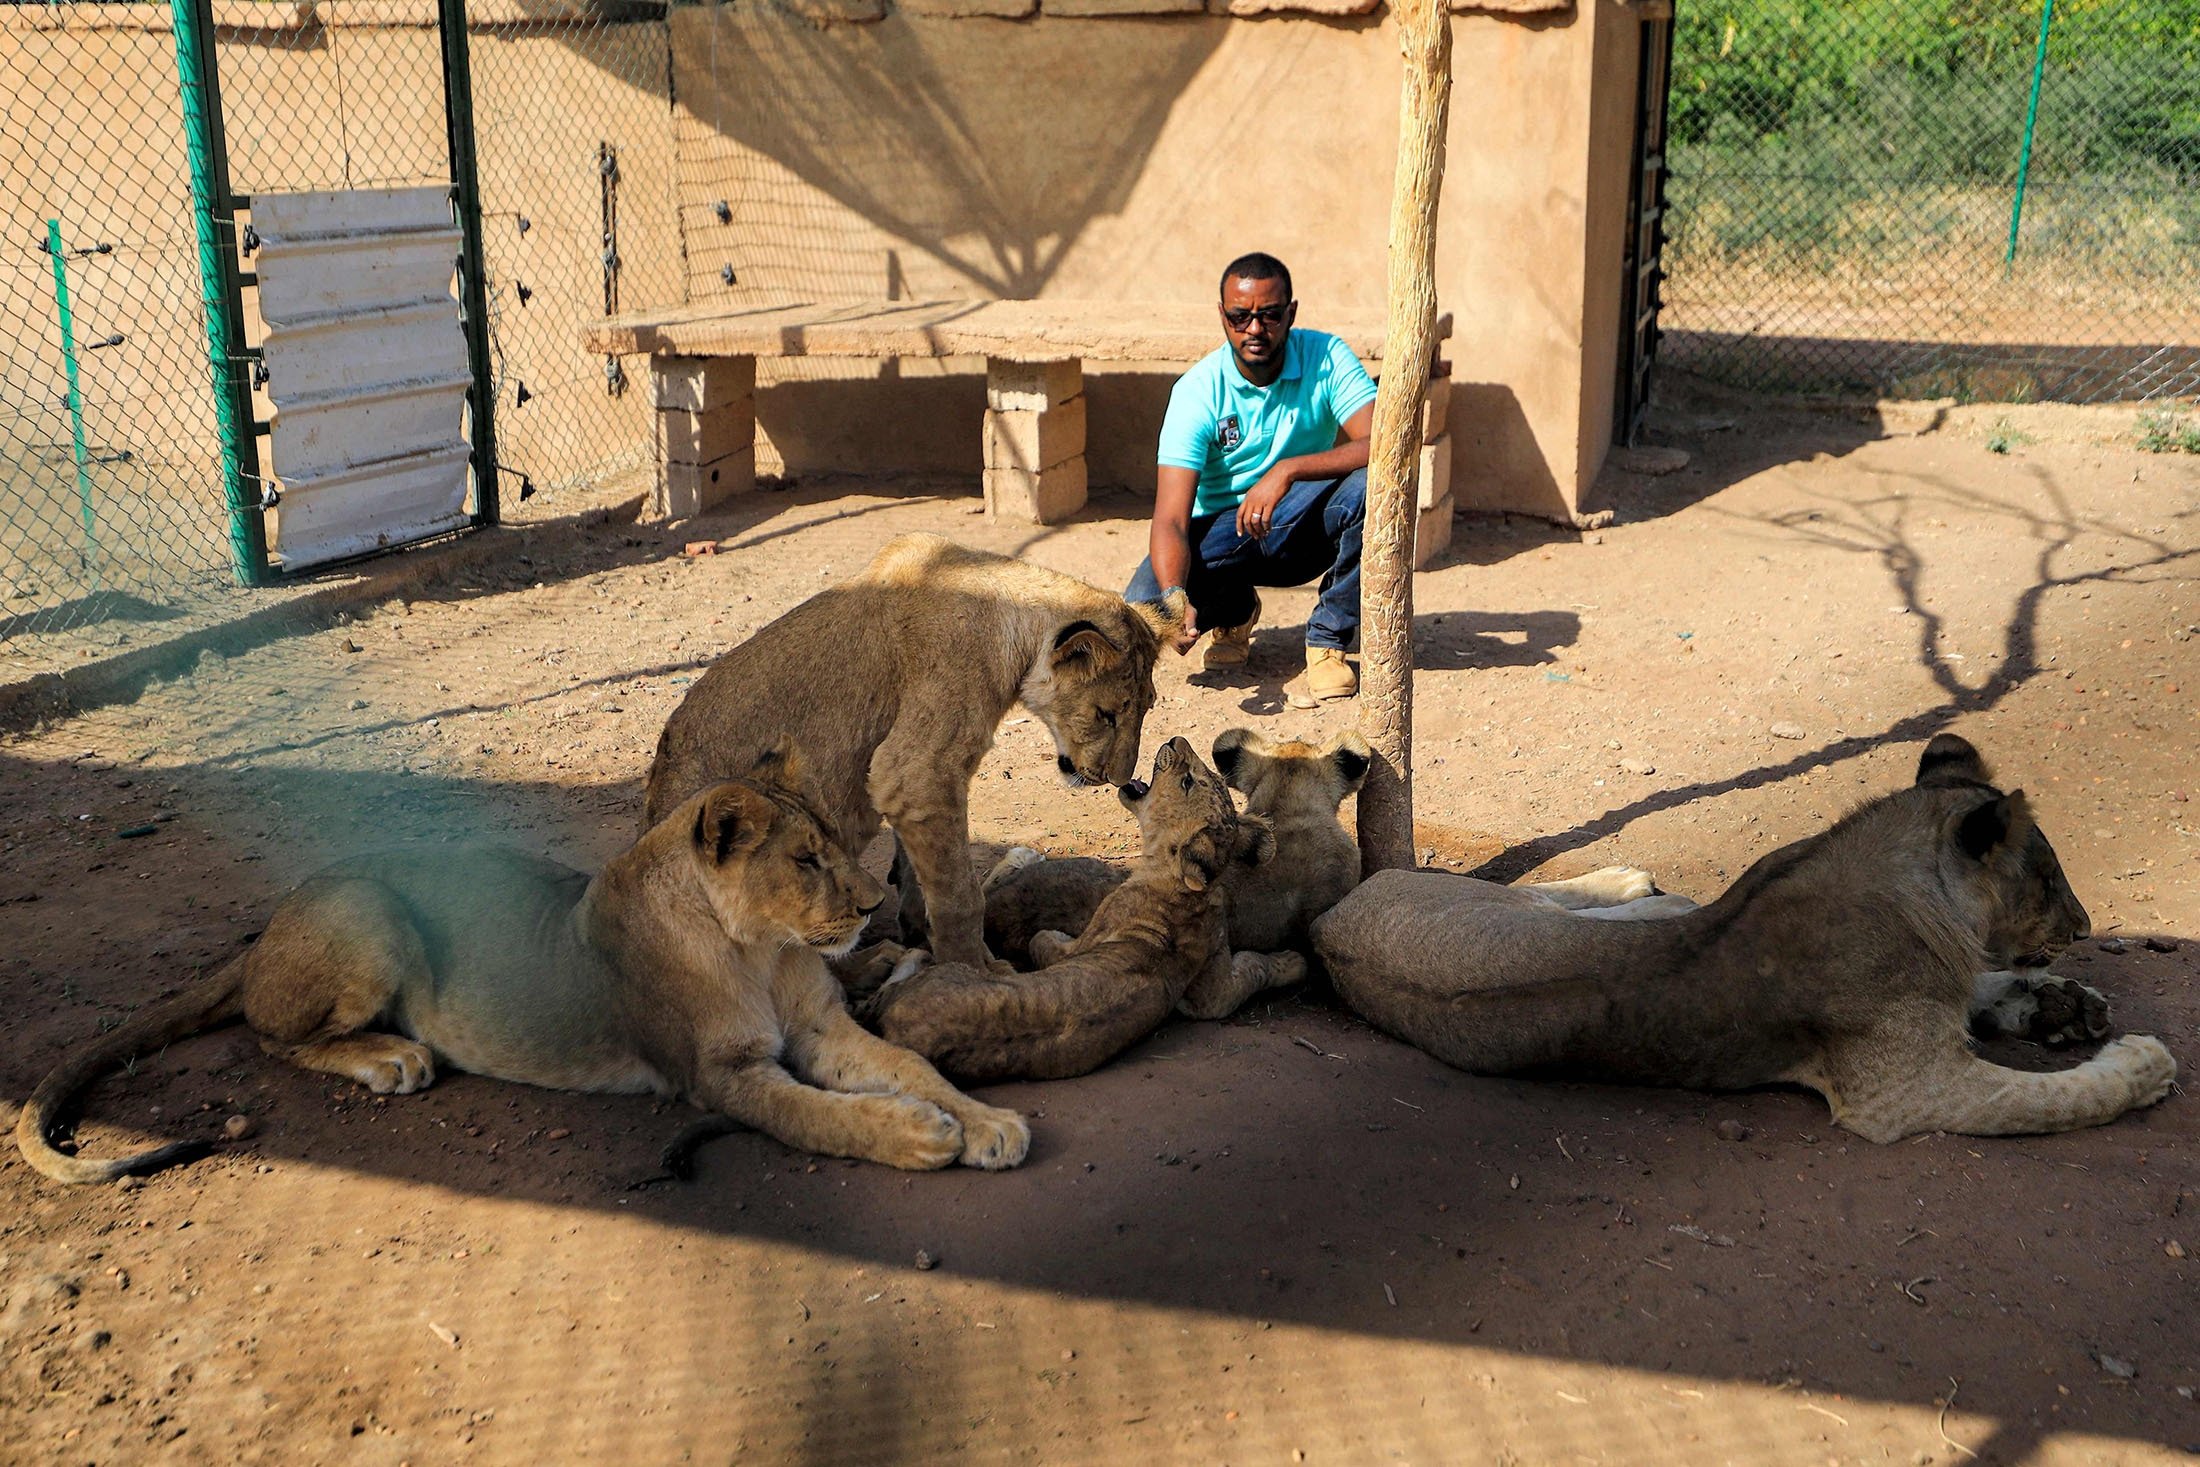 Othman Muhammad Salih, founder of the Sudan Animal Rescue center, sits close to lionesses and cubs at the facility in al-Bageir, south of the capital Khartoum, Sudan, Feb.  28, 2022. (AFP Photo)